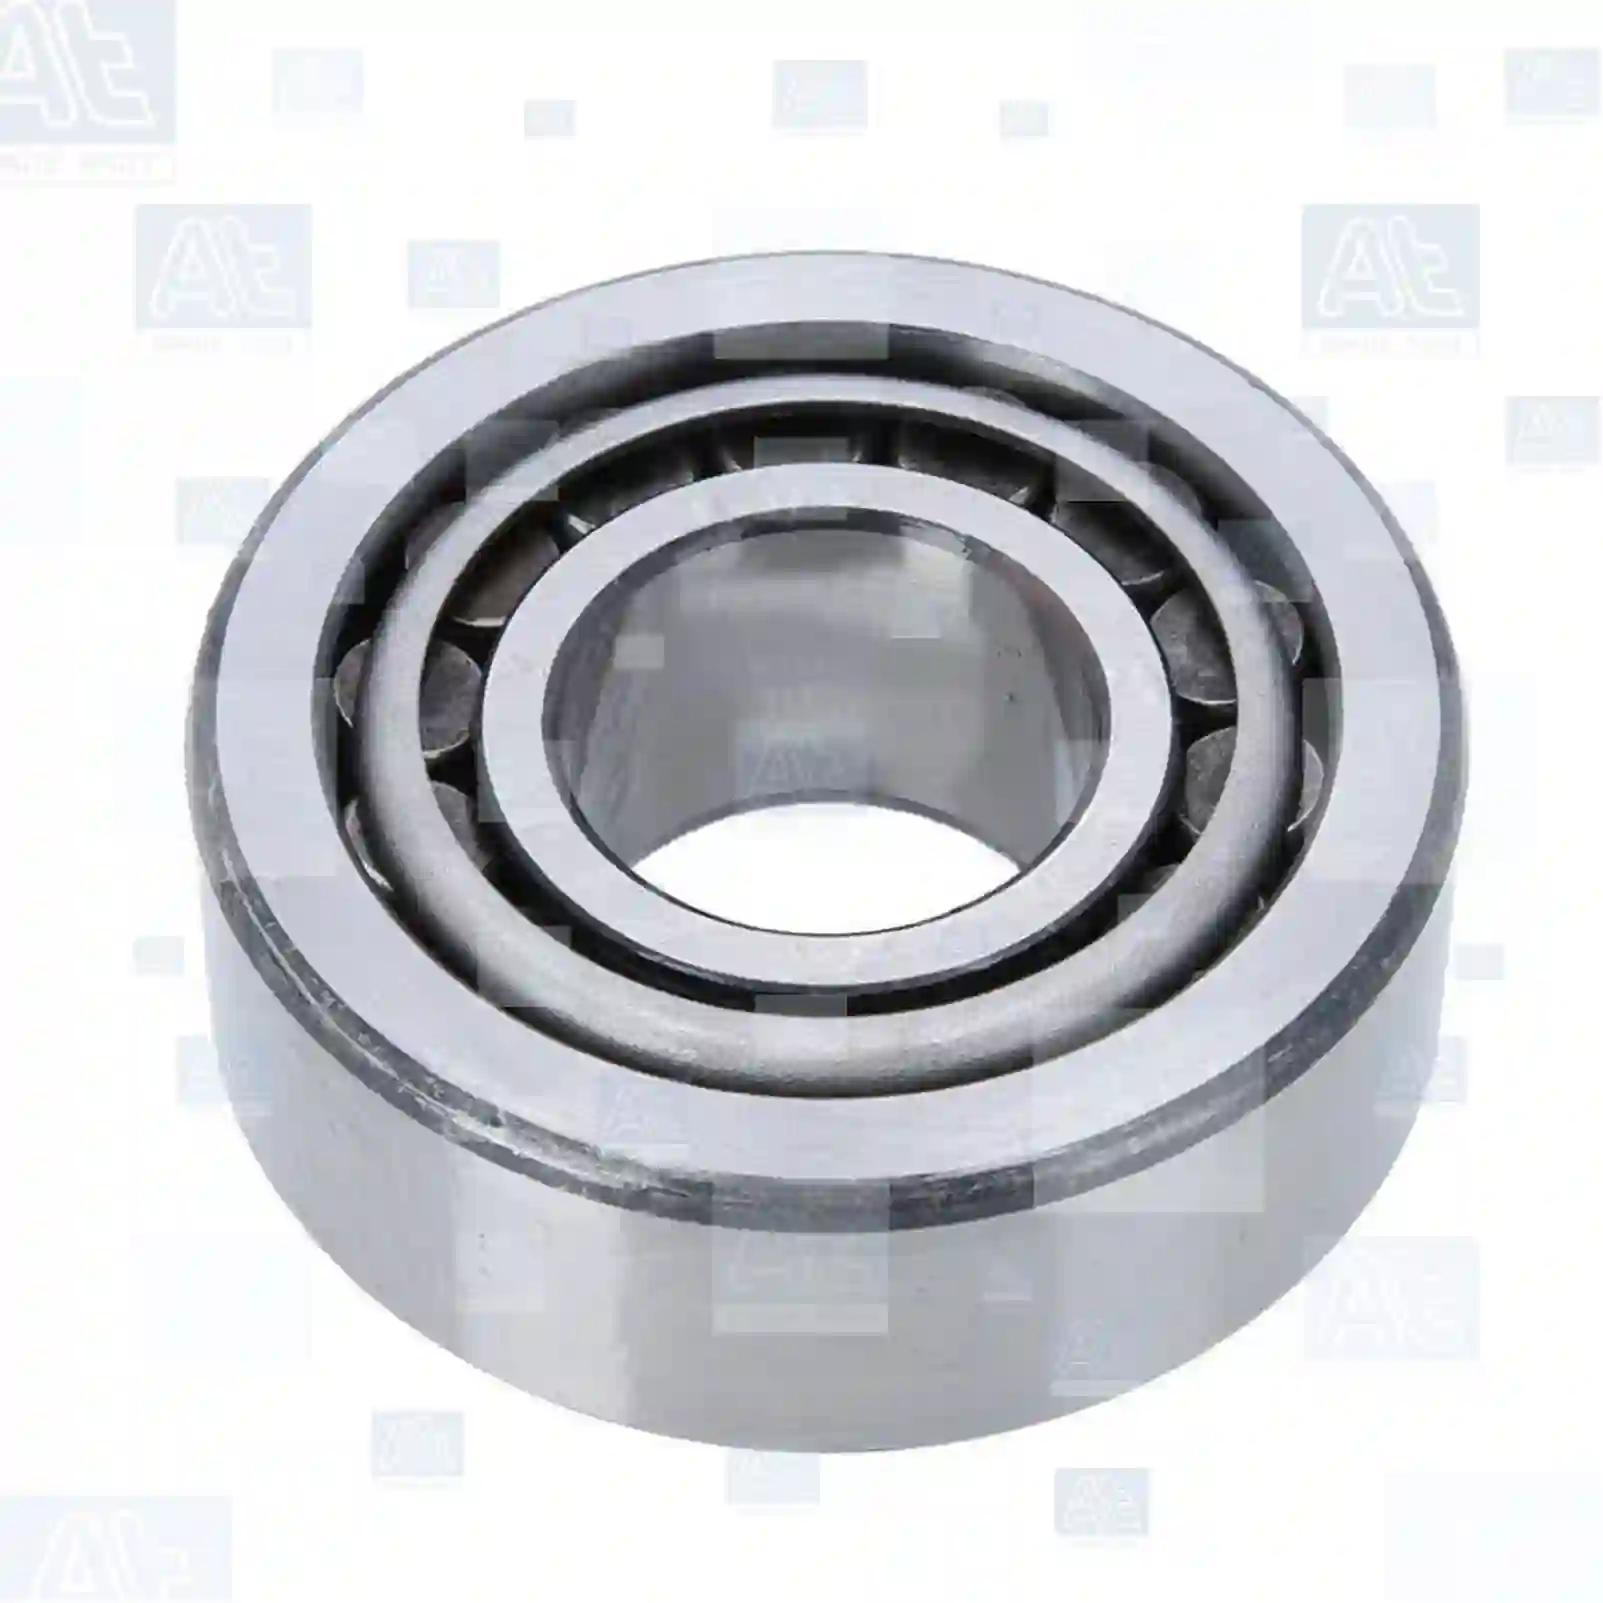 Tapered roller bearing, 77725208, 290063314, 0264060300, 26800560, 91124-PH8-008, 06324902800, 06324990112, 34934200002, 88934206010, A0772320600, A0773230600, 0009819505, 000720032306, 0019818305, 0019818705, 0019819505, 0069815905, 3129810205, 3129810501, 09022-0015P, 38120-13200, 38120-13201, 38120-13210, 7058598, 0023432306, 0773230680, 14614, 0009815318, 806330010, 11073, 66001044, 6601044, ZG03010-0008 ||  77725208 At Spare Part | Engine, Accelerator Pedal, Camshaft, Connecting Rod, Crankcase, Crankshaft, Cylinder Head, Engine Suspension Mountings, Exhaust Manifold, Exhaust Gas Recirculation, Filter Kits, Flywheel Housing, General Overhaul Kits, Engine, Intake Manifold, Oil Cleaner, Oil Cooler, Oil Filter, Oil Pump, Oil Sump, Piston & Liner, Sensor & Switch, Timing Case, Turbocharger, Cooling System, Belt Tensioner, Coolant Filter, Coolant Pipe, Corrosion Prevention Agent, Drive, Expansion Tank, Fan, Intercooler, Monitors & Gauges, Radiator, Thermostat, V-Belt / Timing belt, Water Pump, Fuel System, Electronical Injector Unit, Feed Pump, Fuel Filter, cpl., Fuel Gauge Sender,  Fuel Line, Fuel Pump, Fuel Tank, Injection Line Kit, Injection Pump, Exhaust System, Clutch & Pedal, Gearbox, Propeller Shaft, Axles, Brake System, Hubs & Wheels, Suspension, Leaf Spring, Universal Parts / Accessories, Steering, Electrical System, Cabin Tapered roller bearing, 77725208, 290063314, 0264060300, 26800560, 91124-PH8-008, 06324902800, 06324990112, 34934200002, 88934206010, A0772320600, A0773230600, 0009819505, 000720032306, 0019818305, 0019818705, 0019819505, 0069815905, 3129810205, 3129810501, 09022-0015P, 38120-13200, 38120-13201, 38120-13210, 7058598, 0023432306, 0773230680, 14614, 0009815318, 806330010, 11073, 66001044, 6601044, ZG03010-0008 ||  77725208 At Spare Part | Engine, Accelerator Pedal, Camshaft, Connecting Rod, Crankcase, Crankshaft, Cylinder Head, Engine Suspension Mountings, Exhaust Manifold, Exhaust Gas Recirculation, Filter Kits, Flywheel Housing, General Overhaul Kits, Engine, Intake Manifold, Oil Cleaner, Oil Cooler, Oil Filter, Oil Pump, Oil Sump, Piston & Liner, Sensor & Switch, Timing Case, Turbocharger, Cooling System, Belt Tensioner, Coolant Filter, Coolant Pipe, Corrosion Prevention Agent, Drive, Expansion Tank, Fan, Intercooler, Monitors & Gauges, Radiator, Thermostat, V-Belt / Timing belt, Water Pump, Fuel System, Electronical Injector Unit, Feed Pump, Fuel Filter, cpl., Fuel Gauge Sender,  Fuel Line, Fuel Pump, Fuel Tank, Injection Line Kit, Injection Pump, Exhaust System, Clutch & Pedal, Gearbox, Propeller Shaft, Axles, Brake System, Hubs & Wheels, Suspension, Leaf Spring, Universal Parts / Accessories, Steering, Electrical System, Cabin